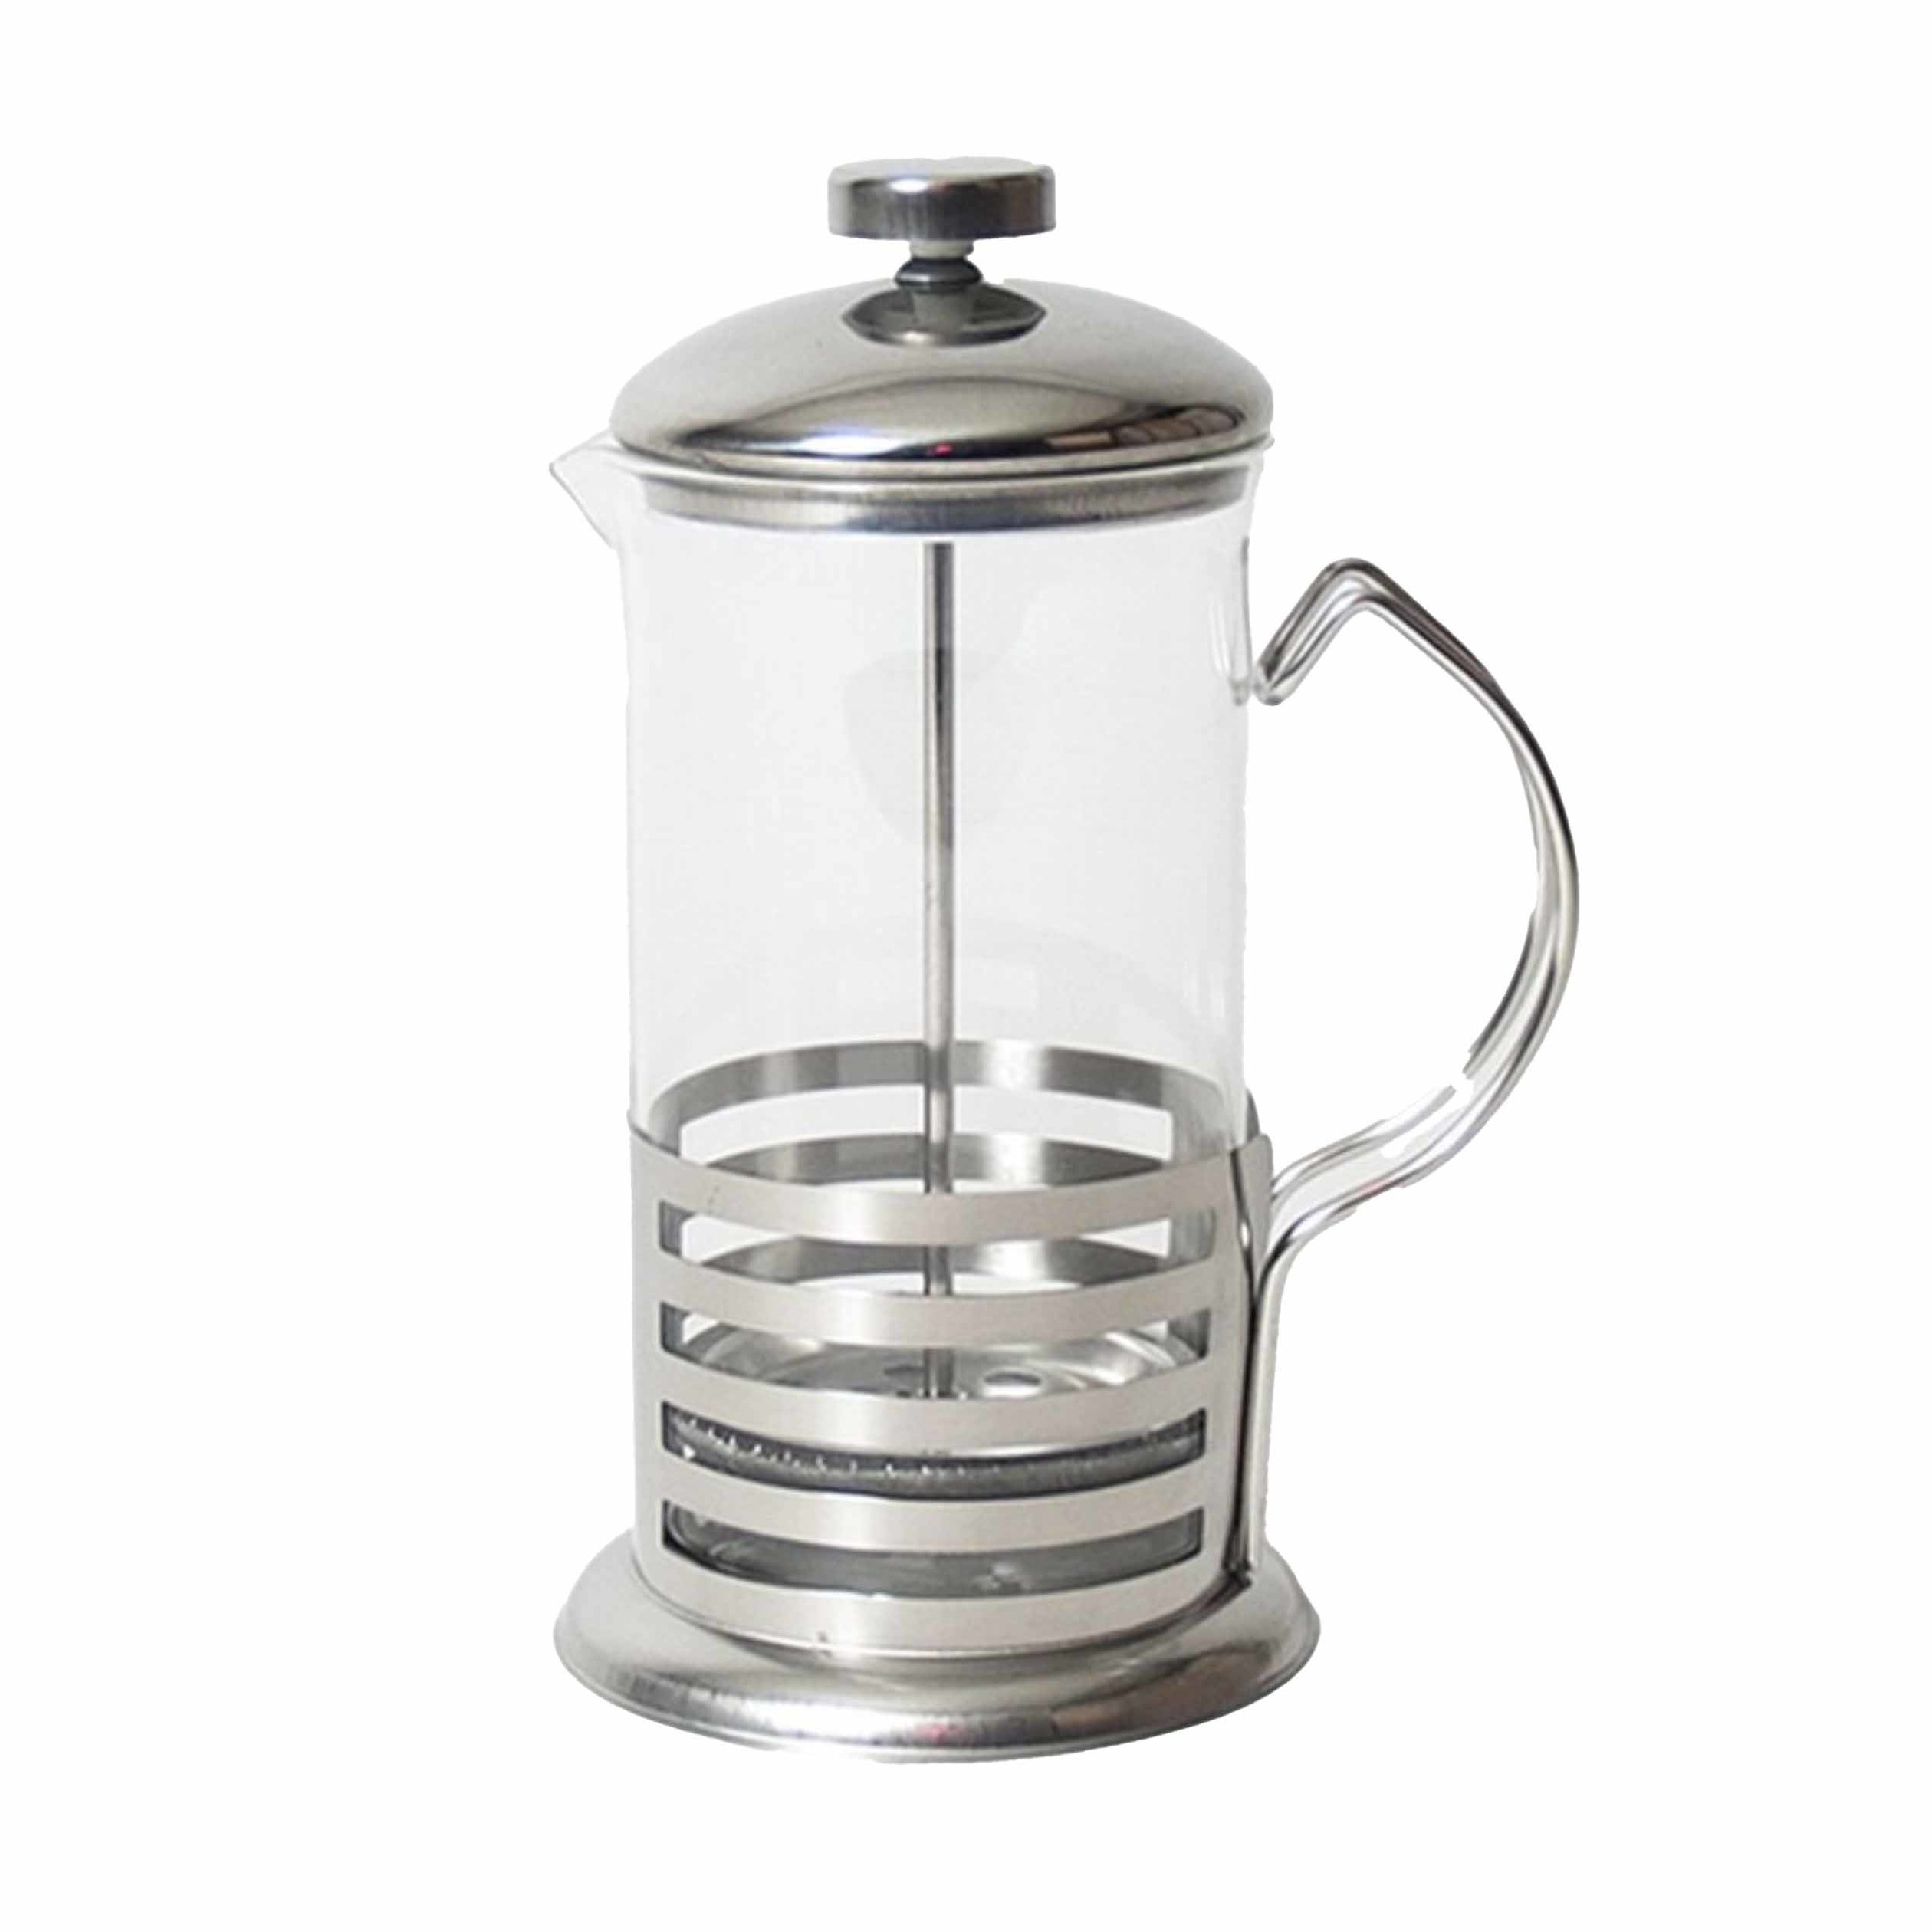 French press koffie-thee maker-cafetiere glas-RVS 350 ml